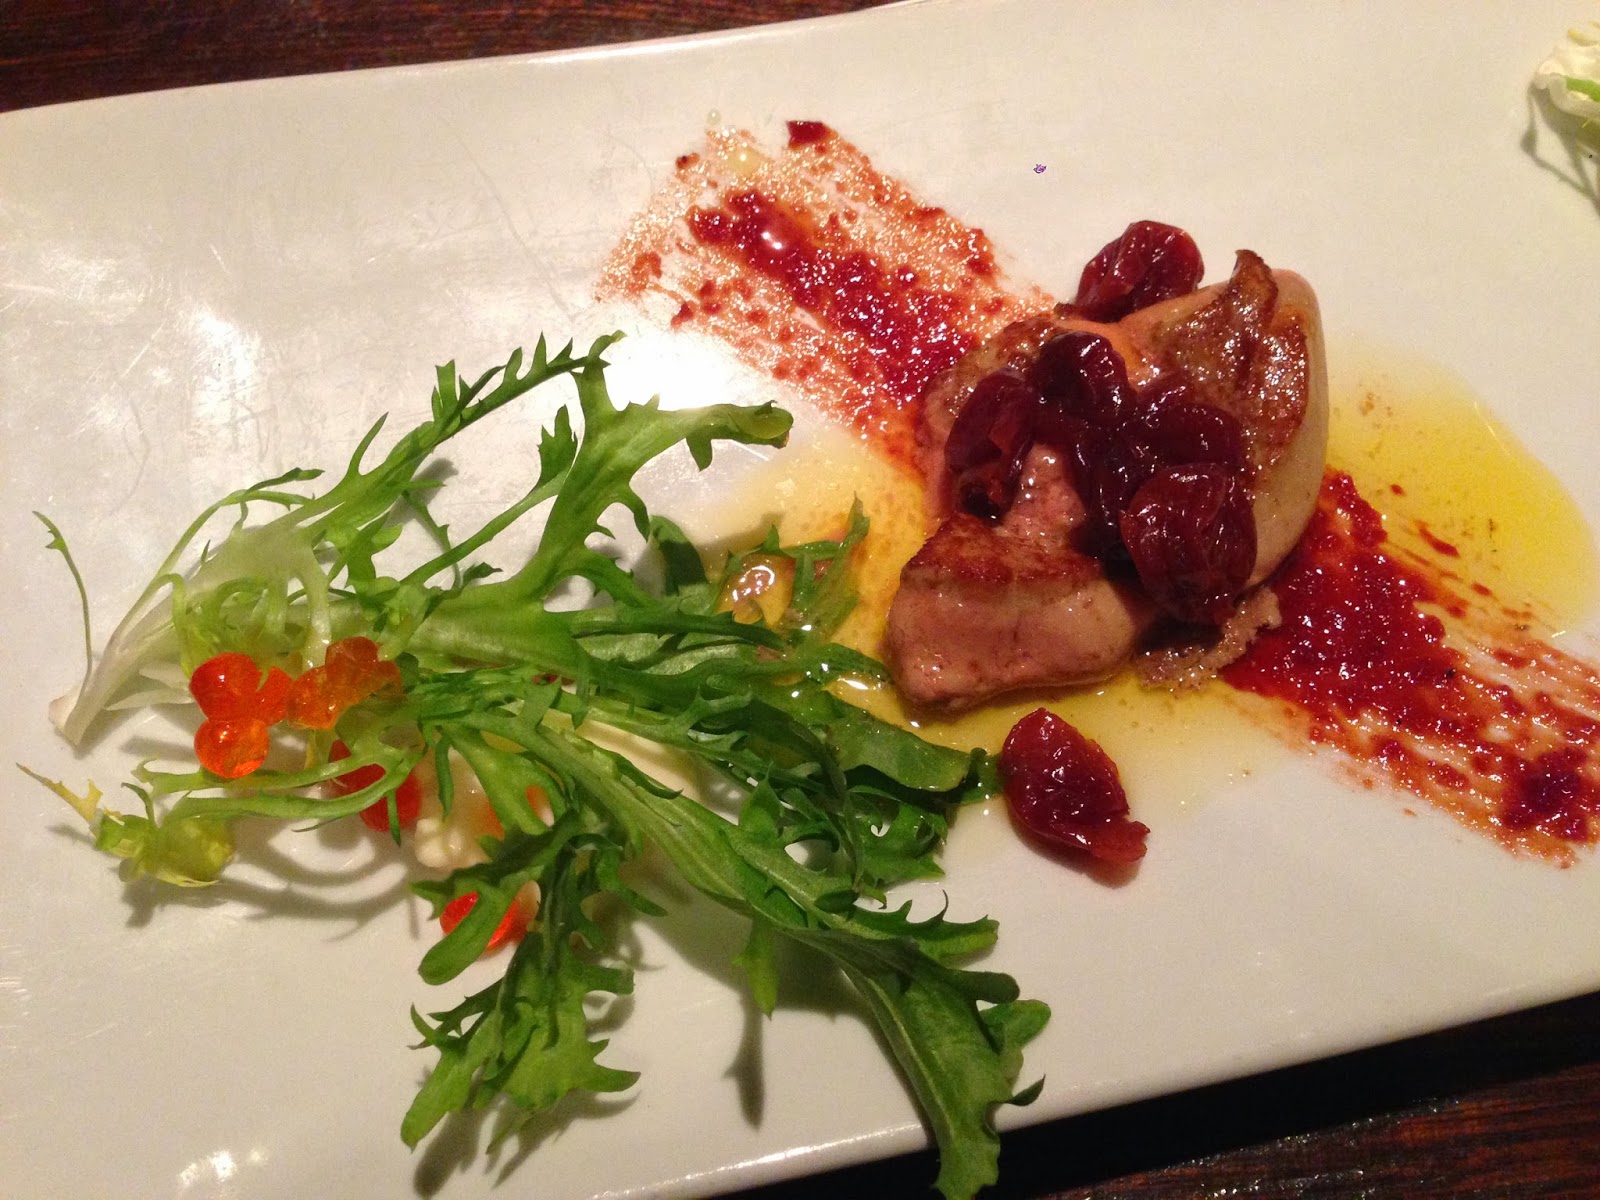 Seared Foie Gras, House Smoked Trout Roe, Honey Creme Fraiche, Bourbon Infused Cherries, Frisee